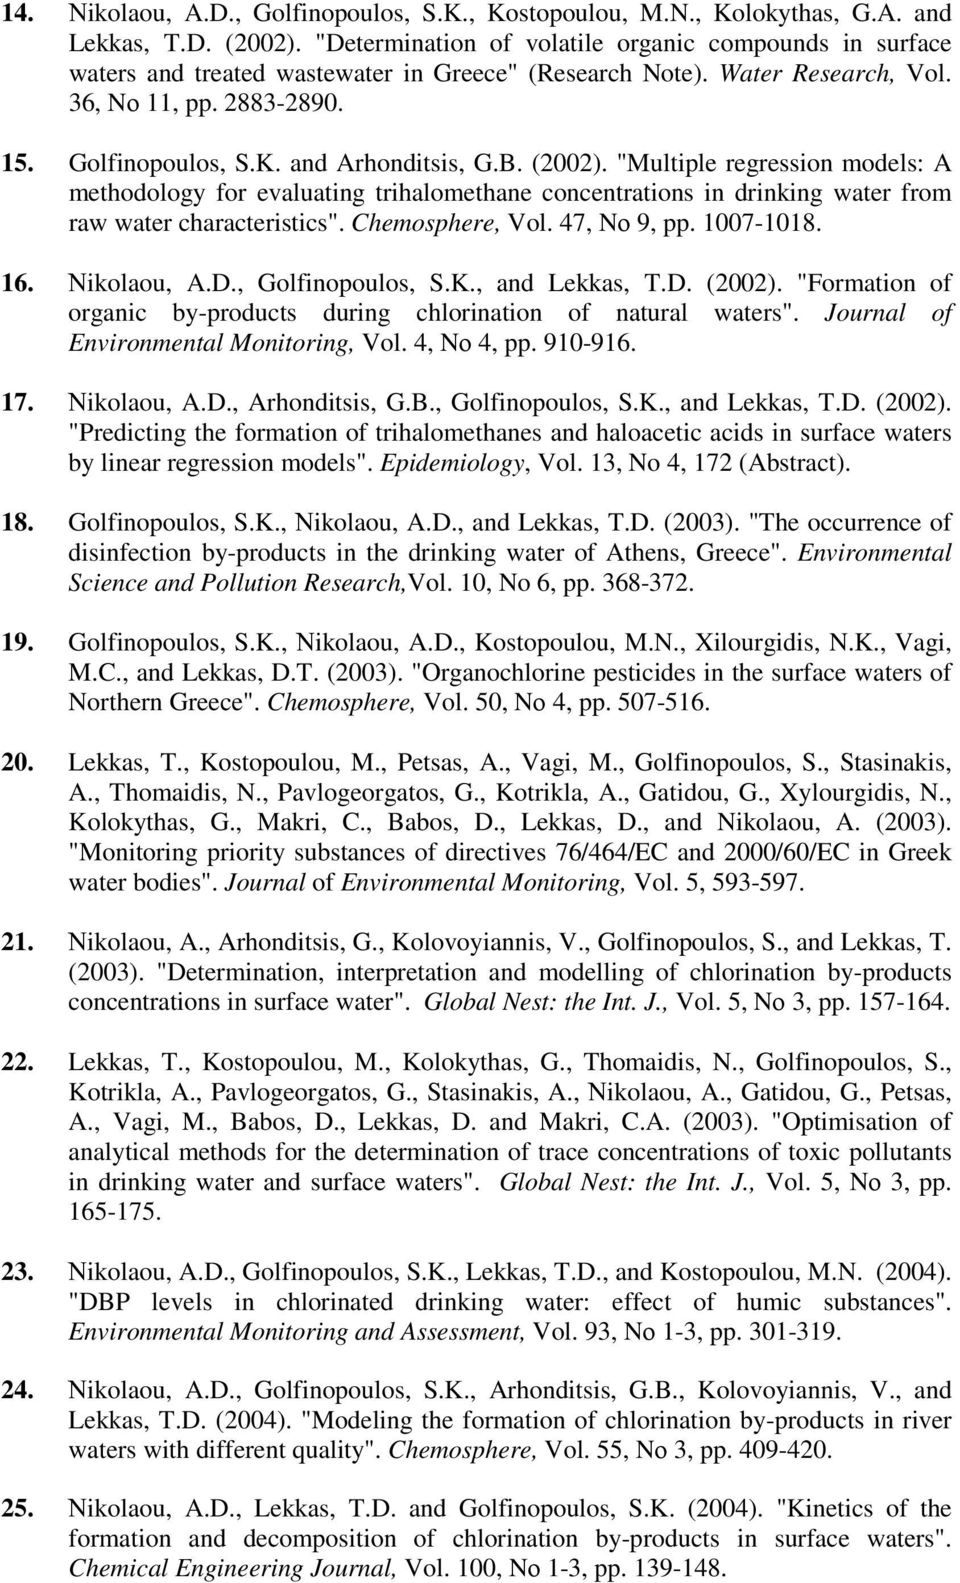 and Arhonditsis, G.B. (2002). "Multiple regression models: A methodology for evaluating trihalomethane concentrations in drinking water from raw water characteristics". Chemosphere, Vol. 47, Nο 9, pp.